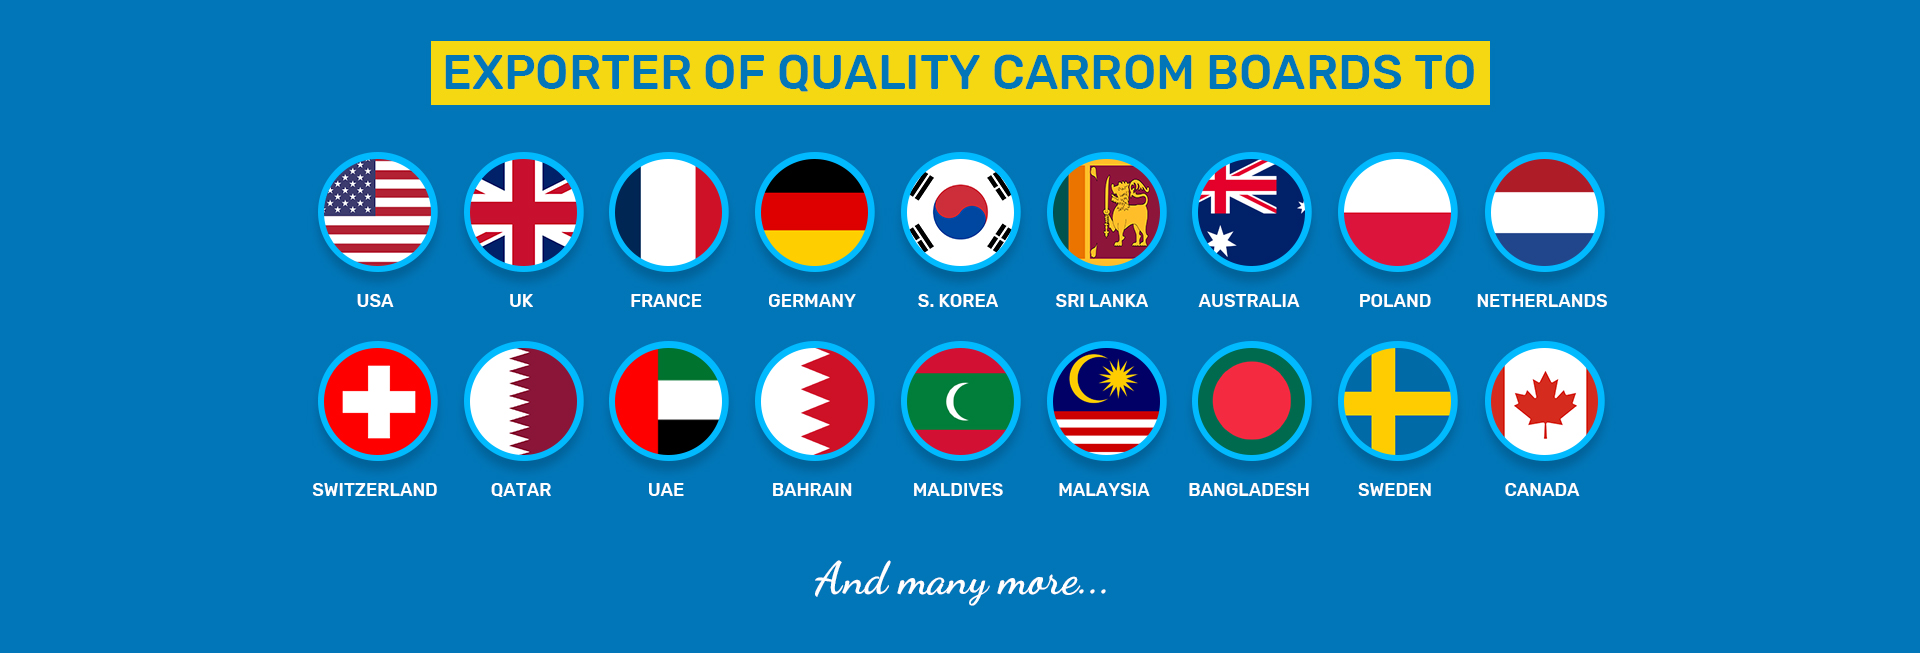 Exporter Quality of Carrom Board